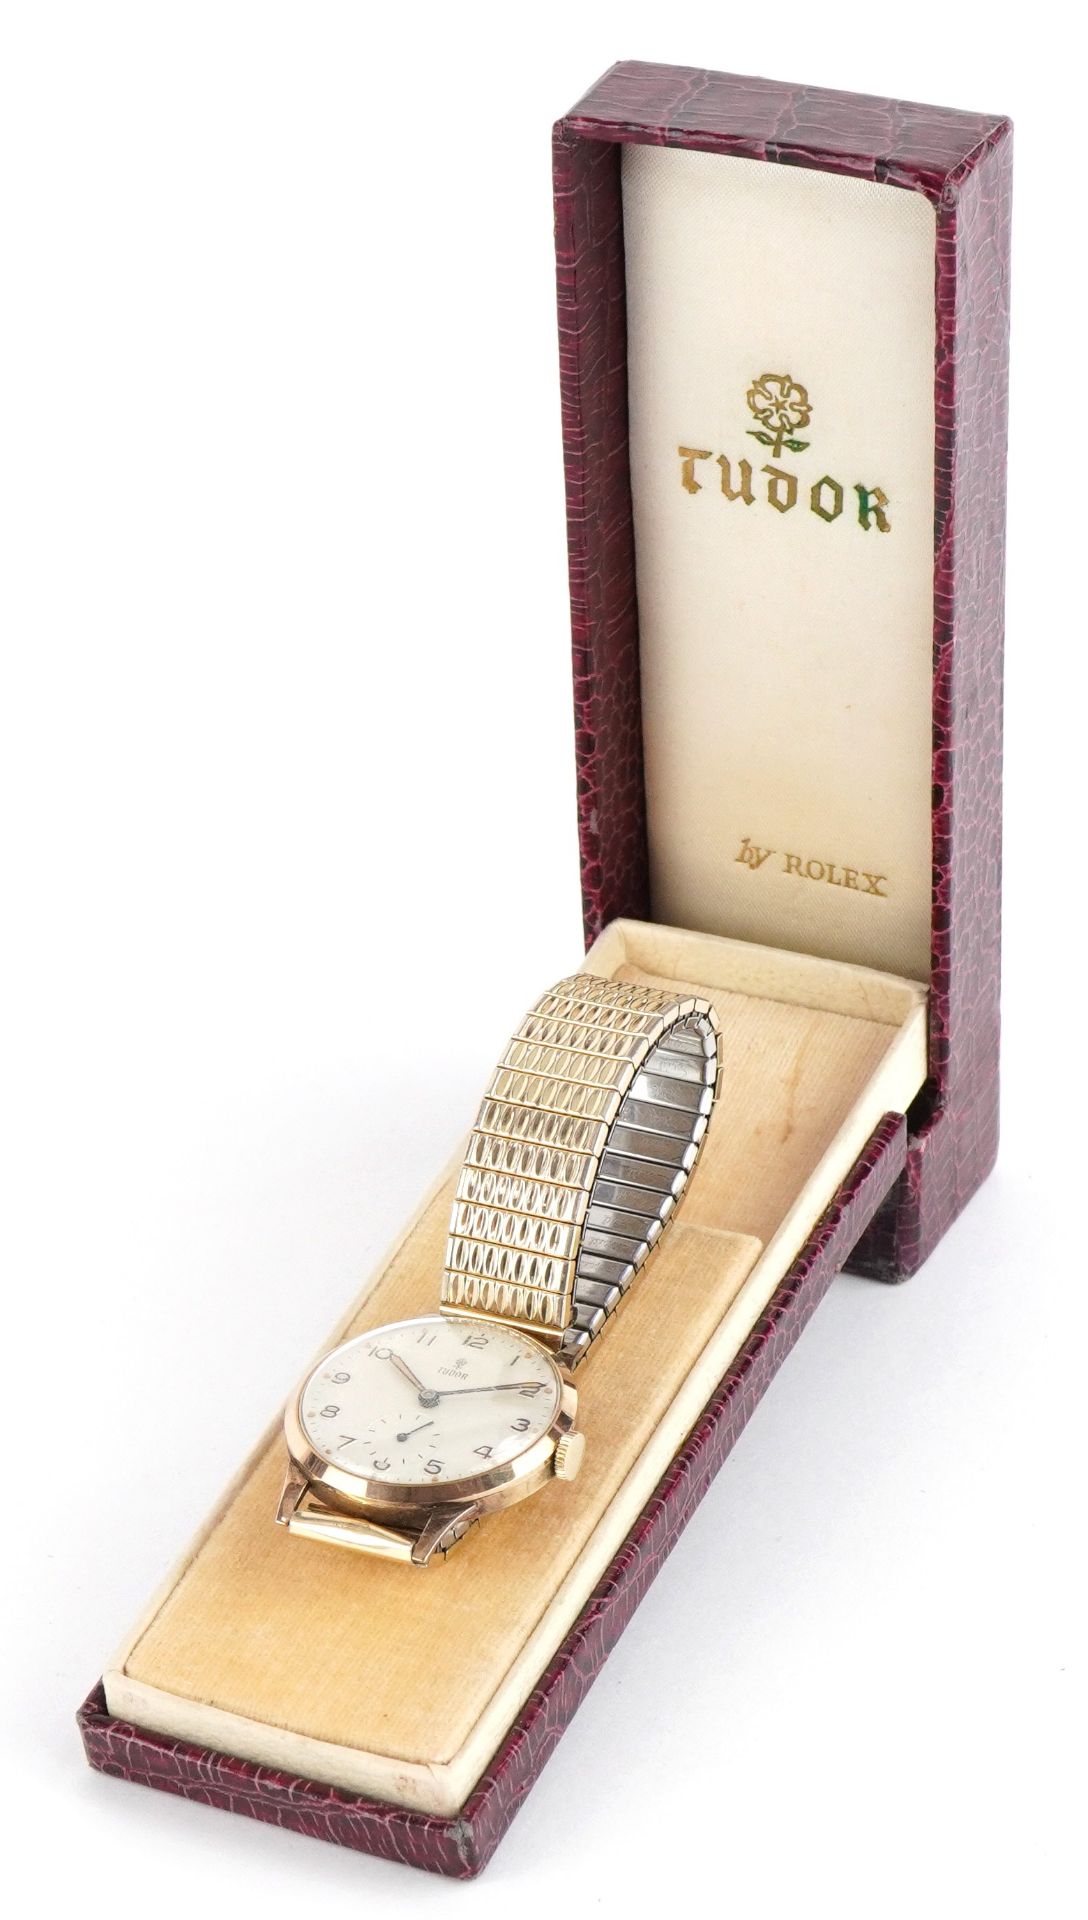 Tudor, gentlemen's 9ct gold Tudor wristwatch with subsidiary dial with Tudor by Rolex box, the - Image 6 of 7